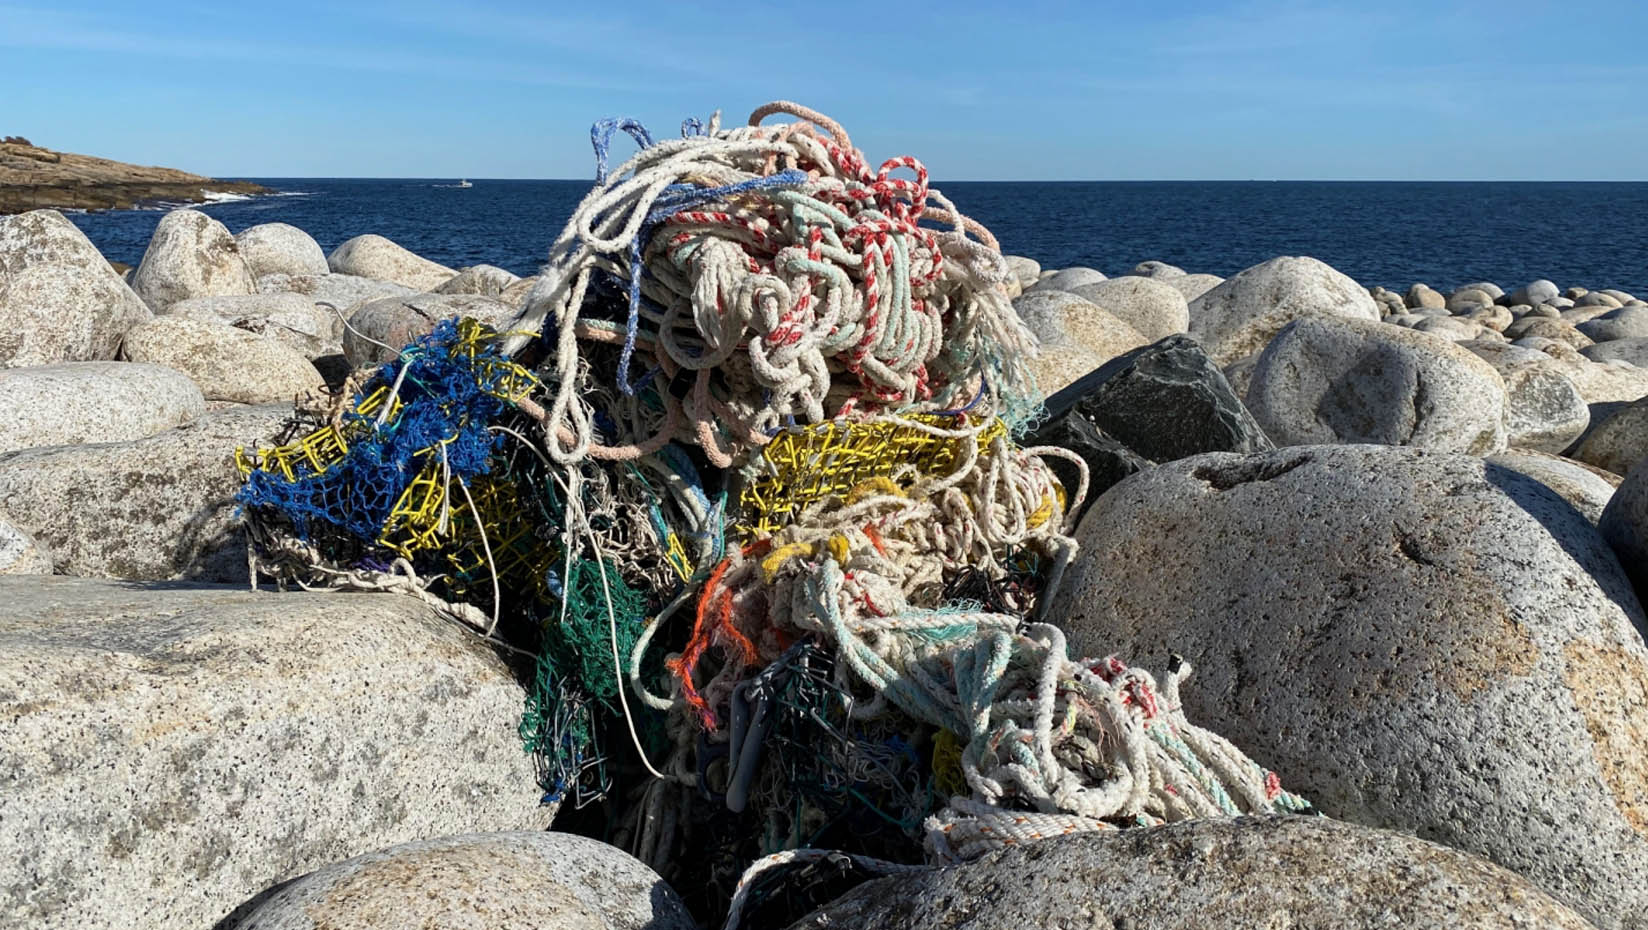 Pile of tangled rope debris on a rocky beach